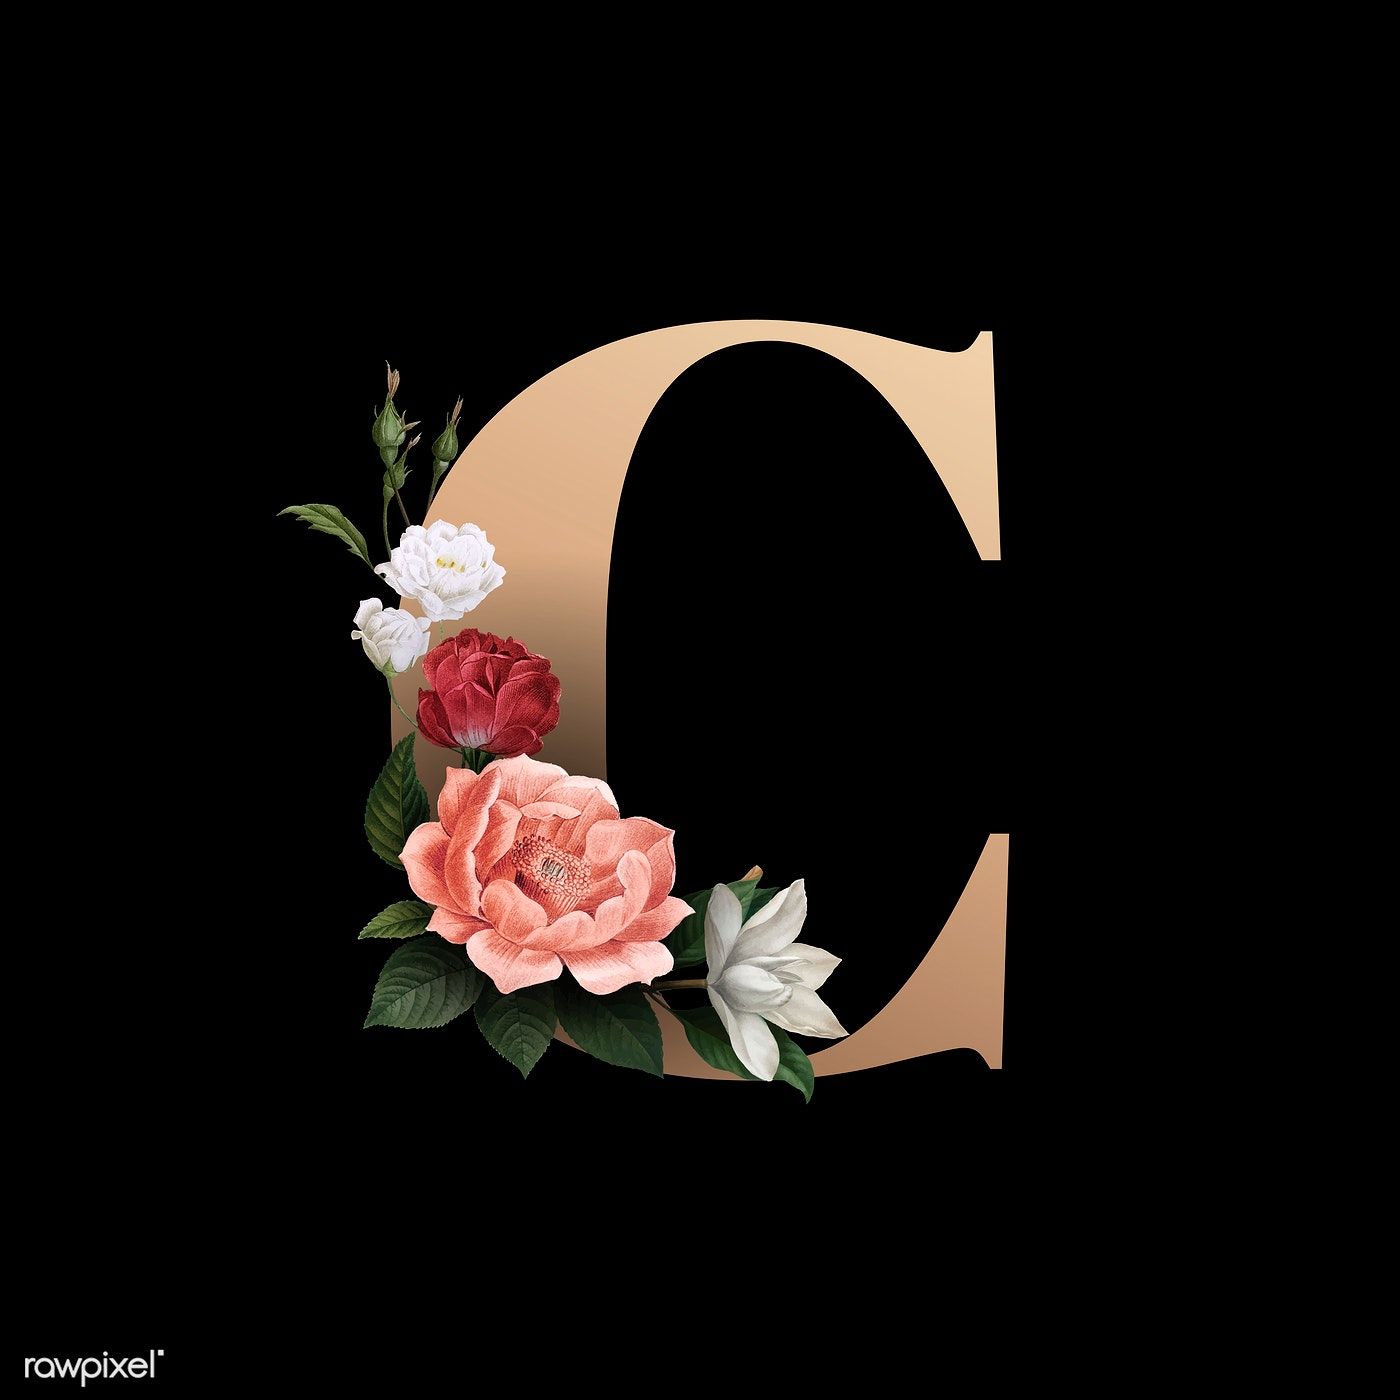 Classic and elegant floral alphabet font letter C vector. free image by rawpixel.com